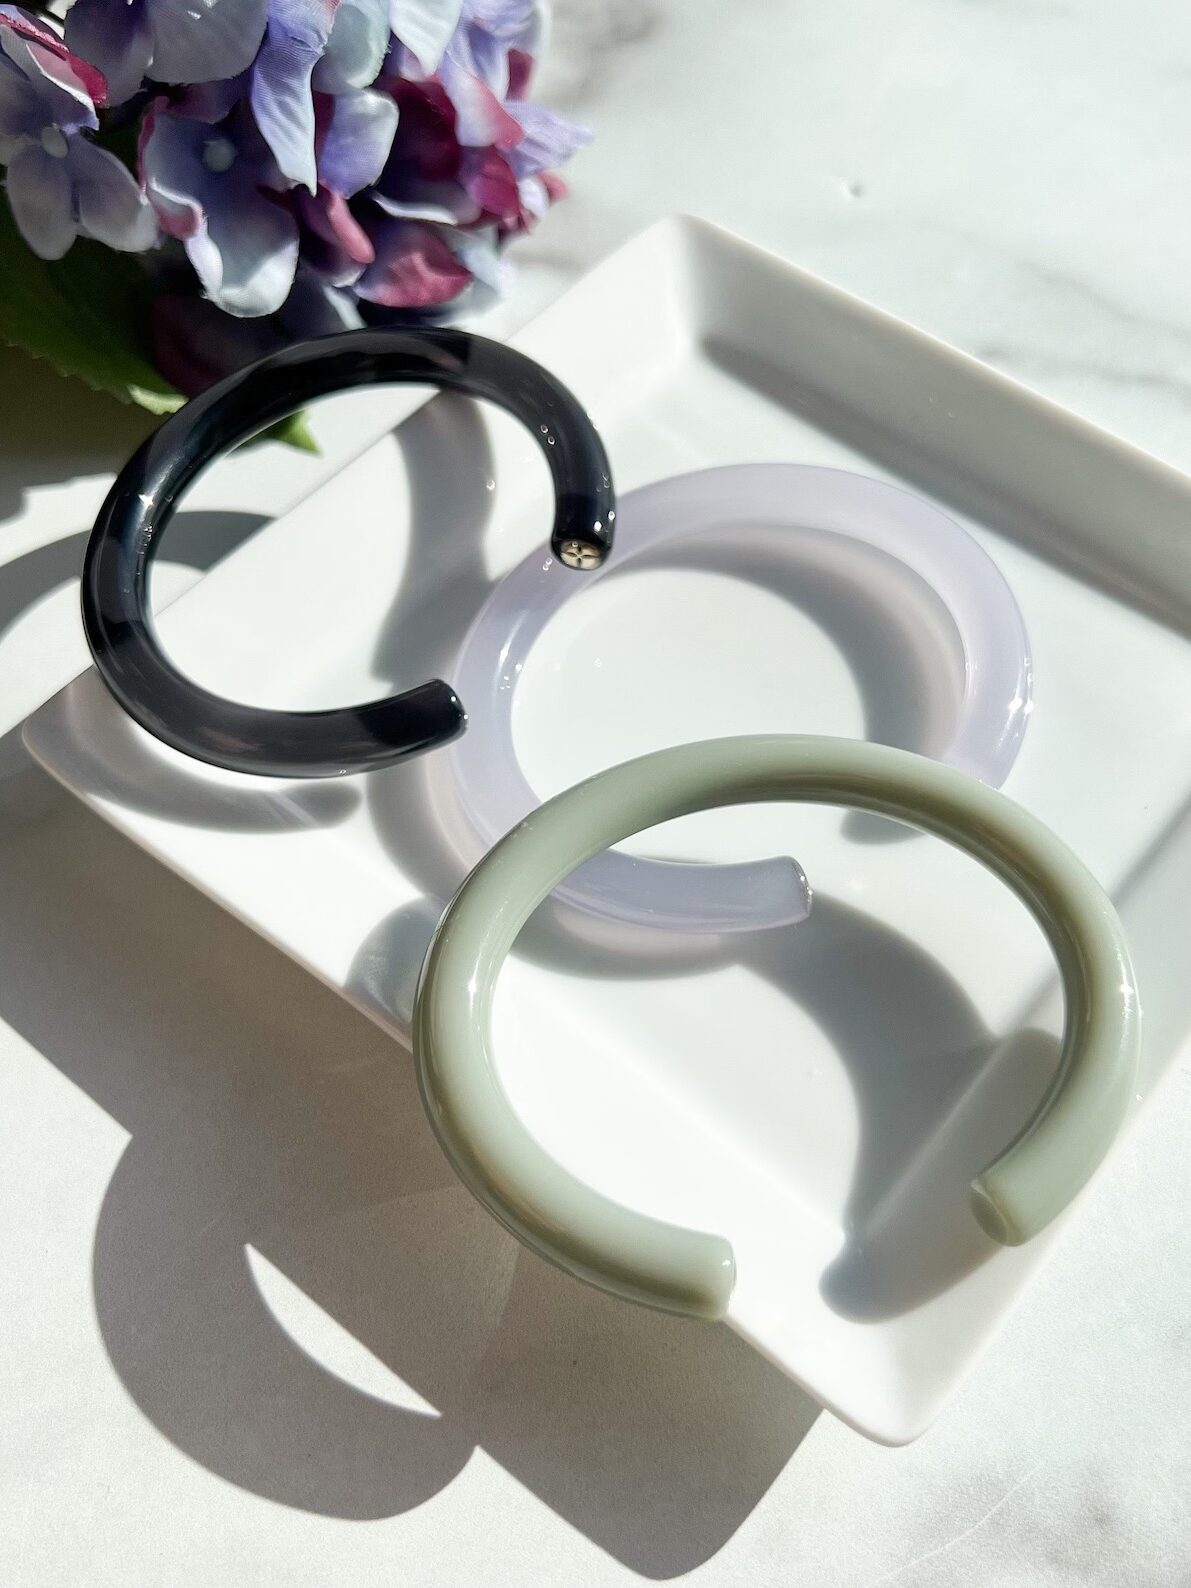 Three acrylic hoop earrings in black, white, and pale green displayed on a square white dish beside a hydrangea flower.